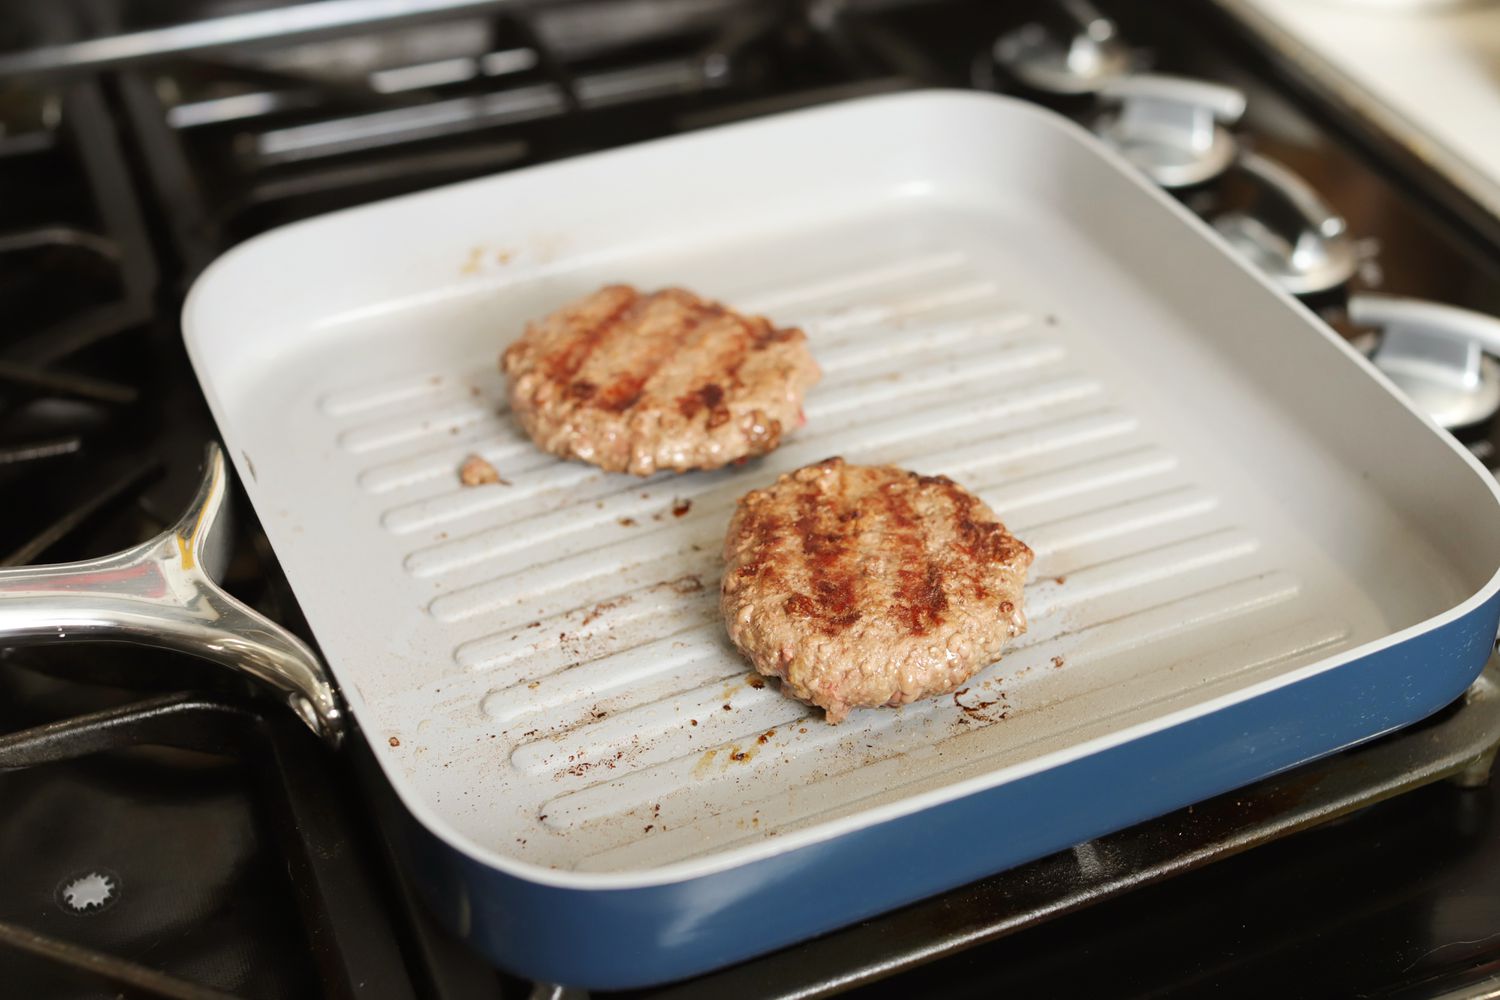 Small hamburgers cooking in the Caraway Griddle Pan